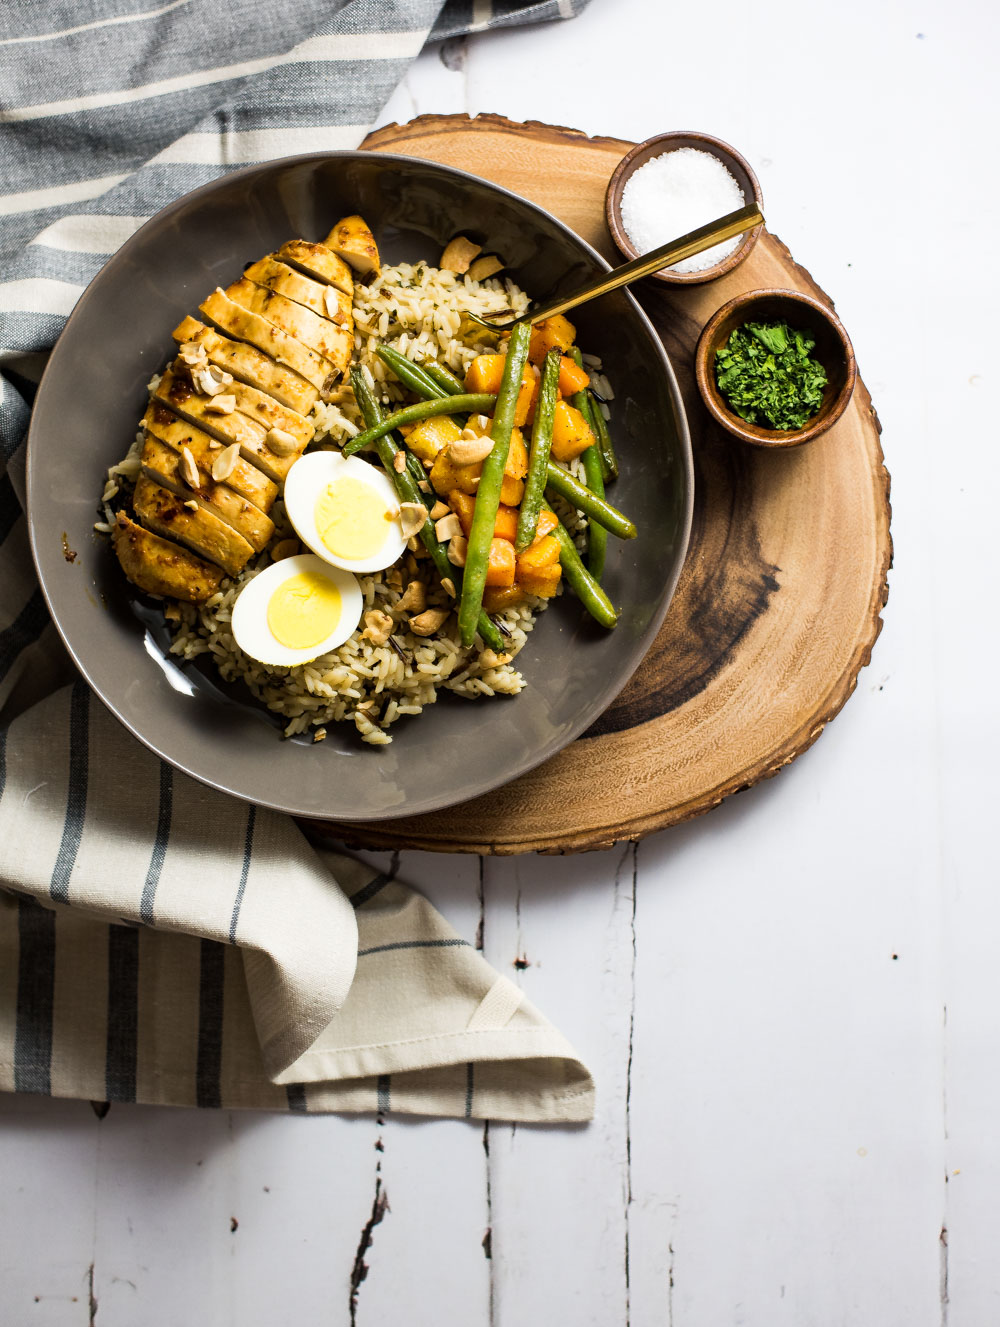 Brown Butter rice bowls with marinated chicken breast and roasted veggies is the perfect family-friendly weeknight meal that's loaded with nutritious deliciousness!